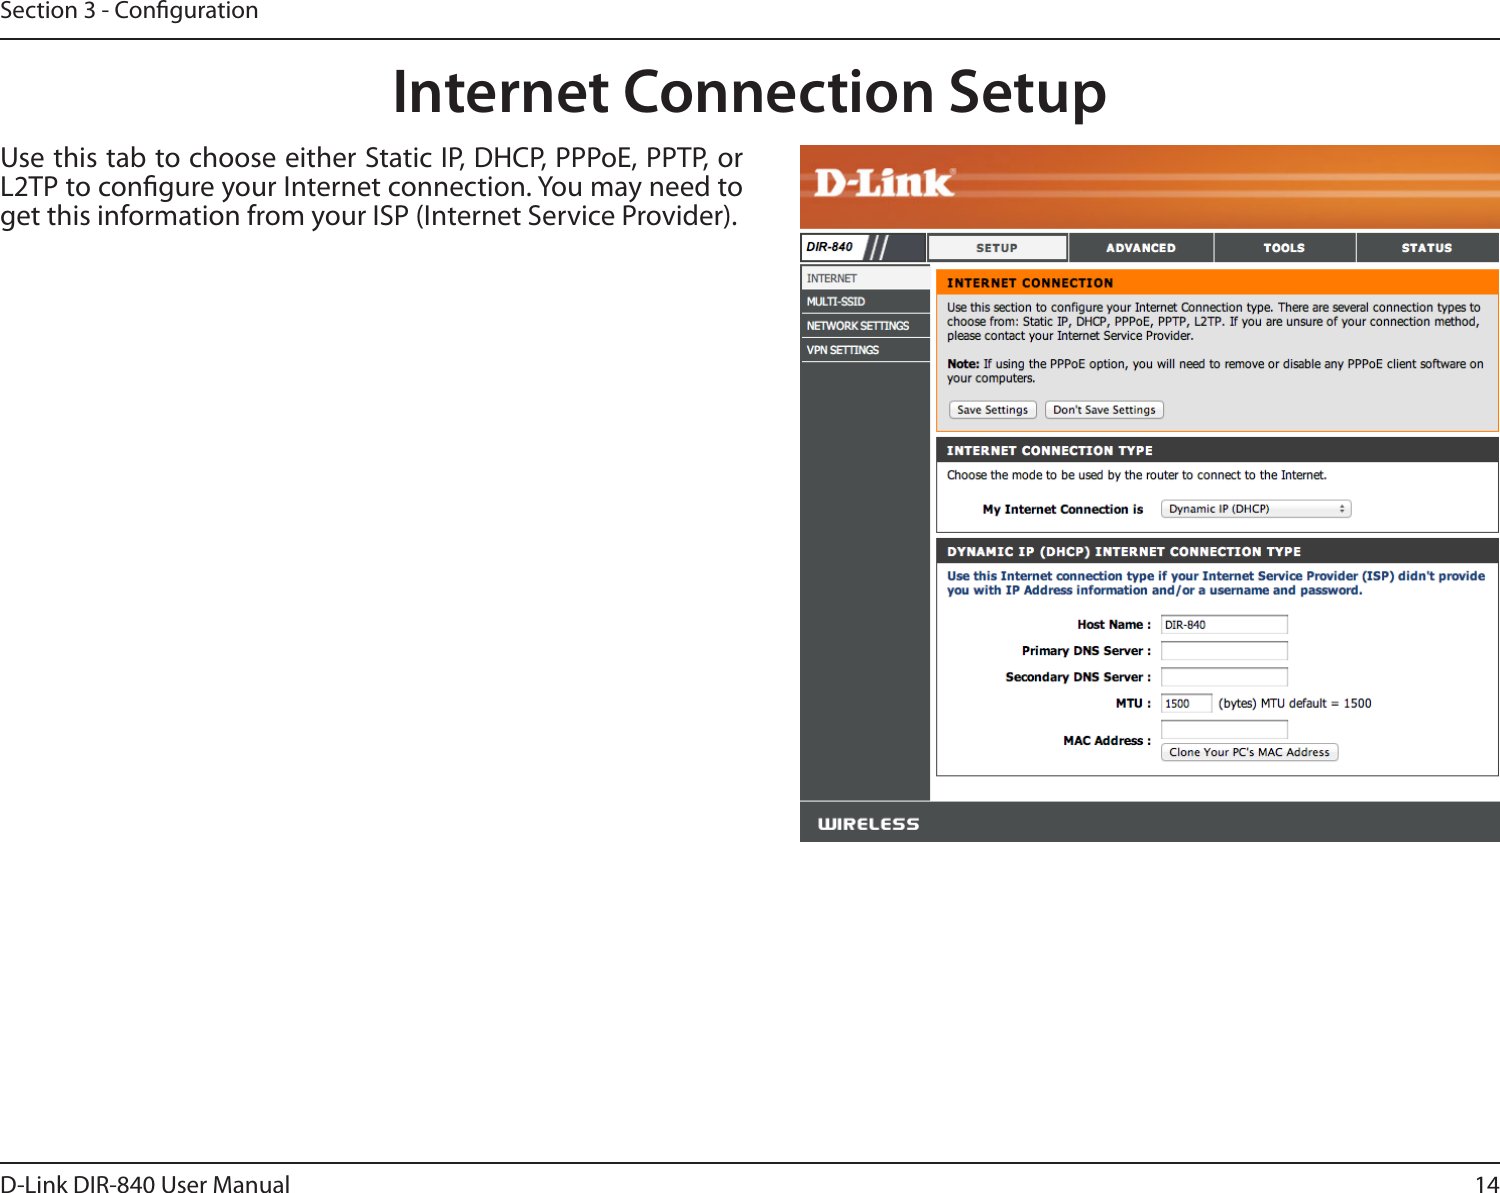 14D-Link DIR-840 User ManualSection 3 - CongurationInternet Connection SetupUse this tab to choose either Static IP, DHCP, PPPoE, PPTP, or L2TP to congure your Internet connection. You may need to get this information from your ISP (Internet Service Provider).